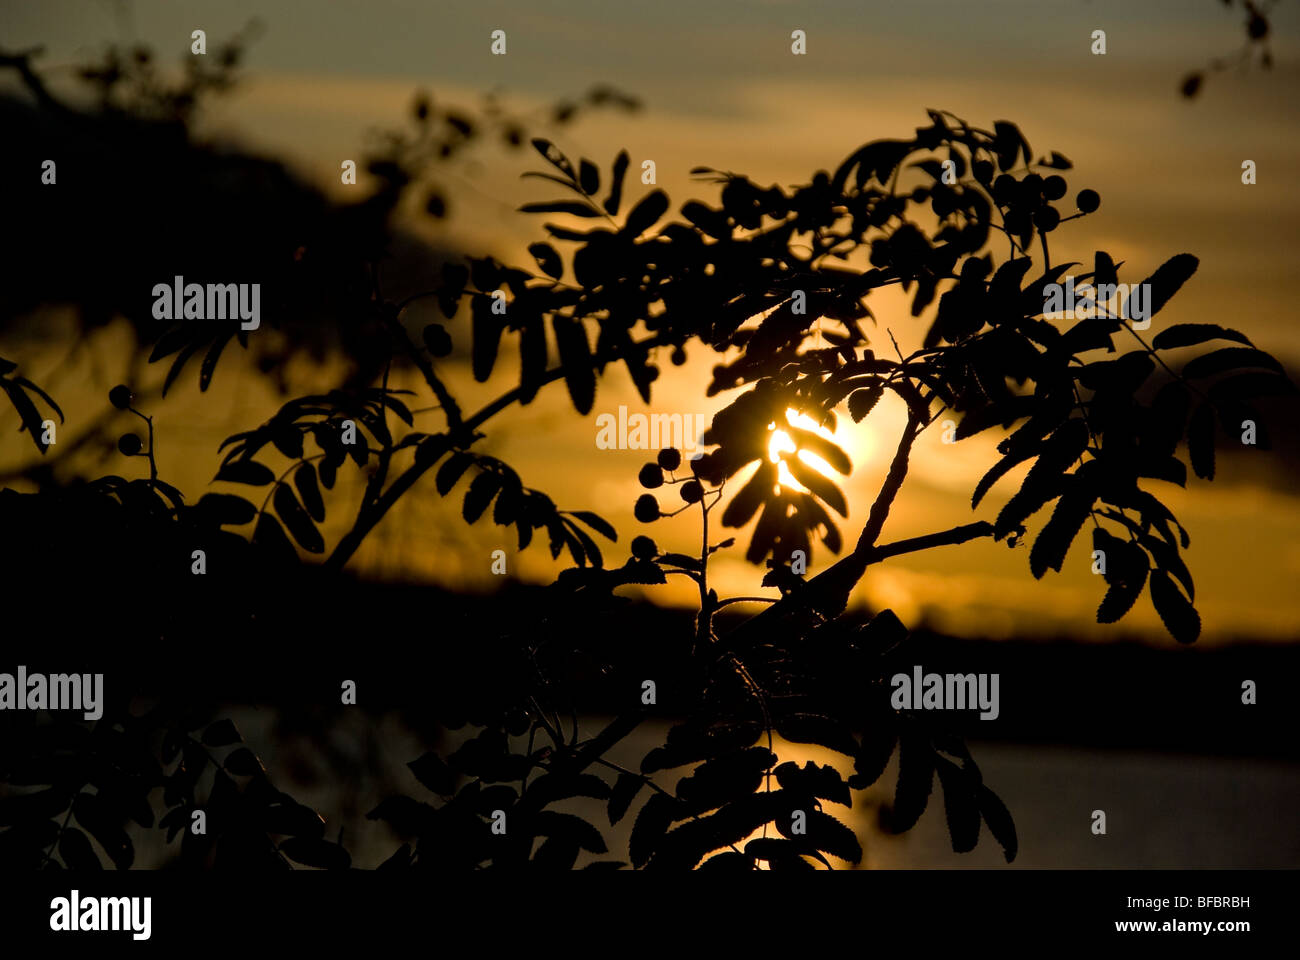 A silhouette of rowan leaves and berries against a golden autumn sunset in Finland Stock Photo